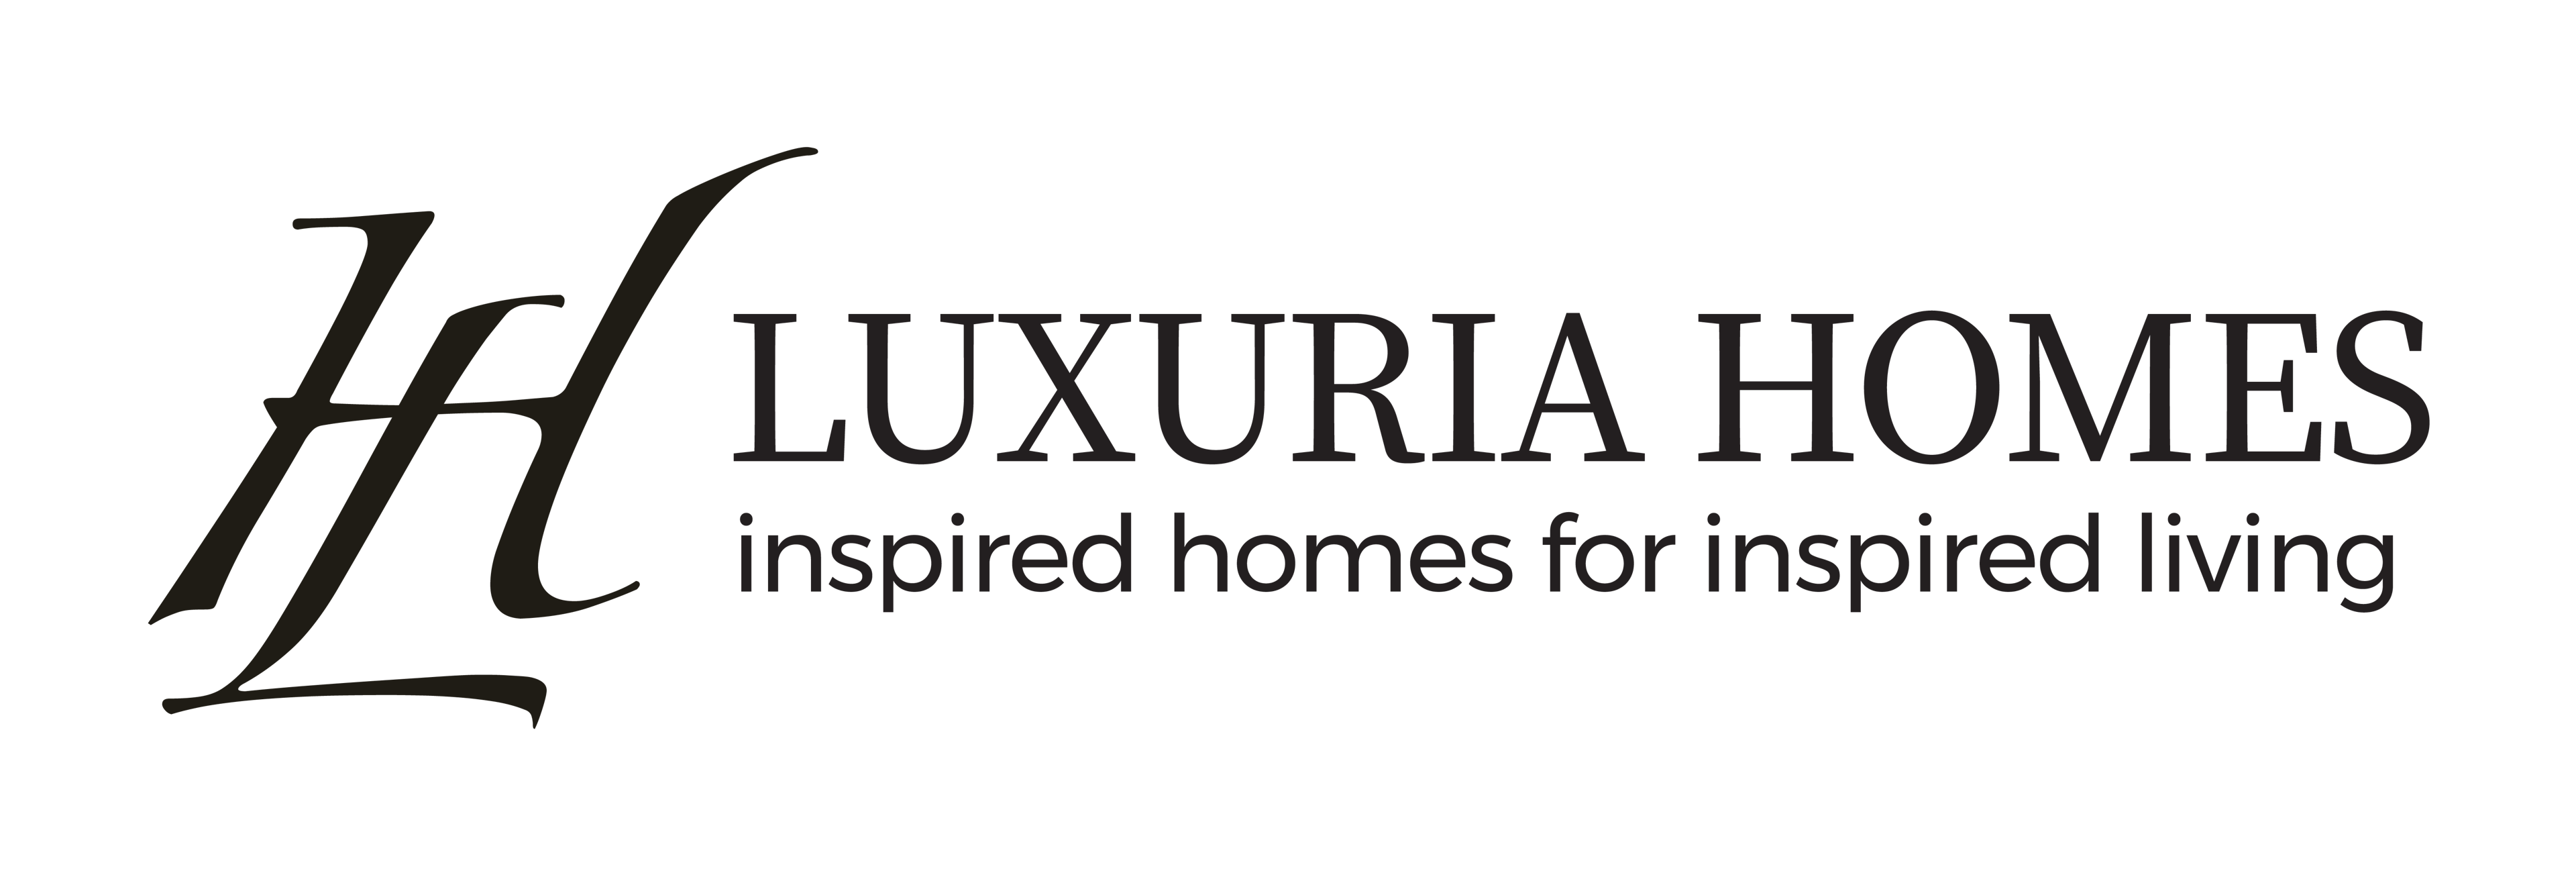 Luxuria Homes logo in black on a transparent background, with text reading 'inspired homes for inspired living' set below the company name.